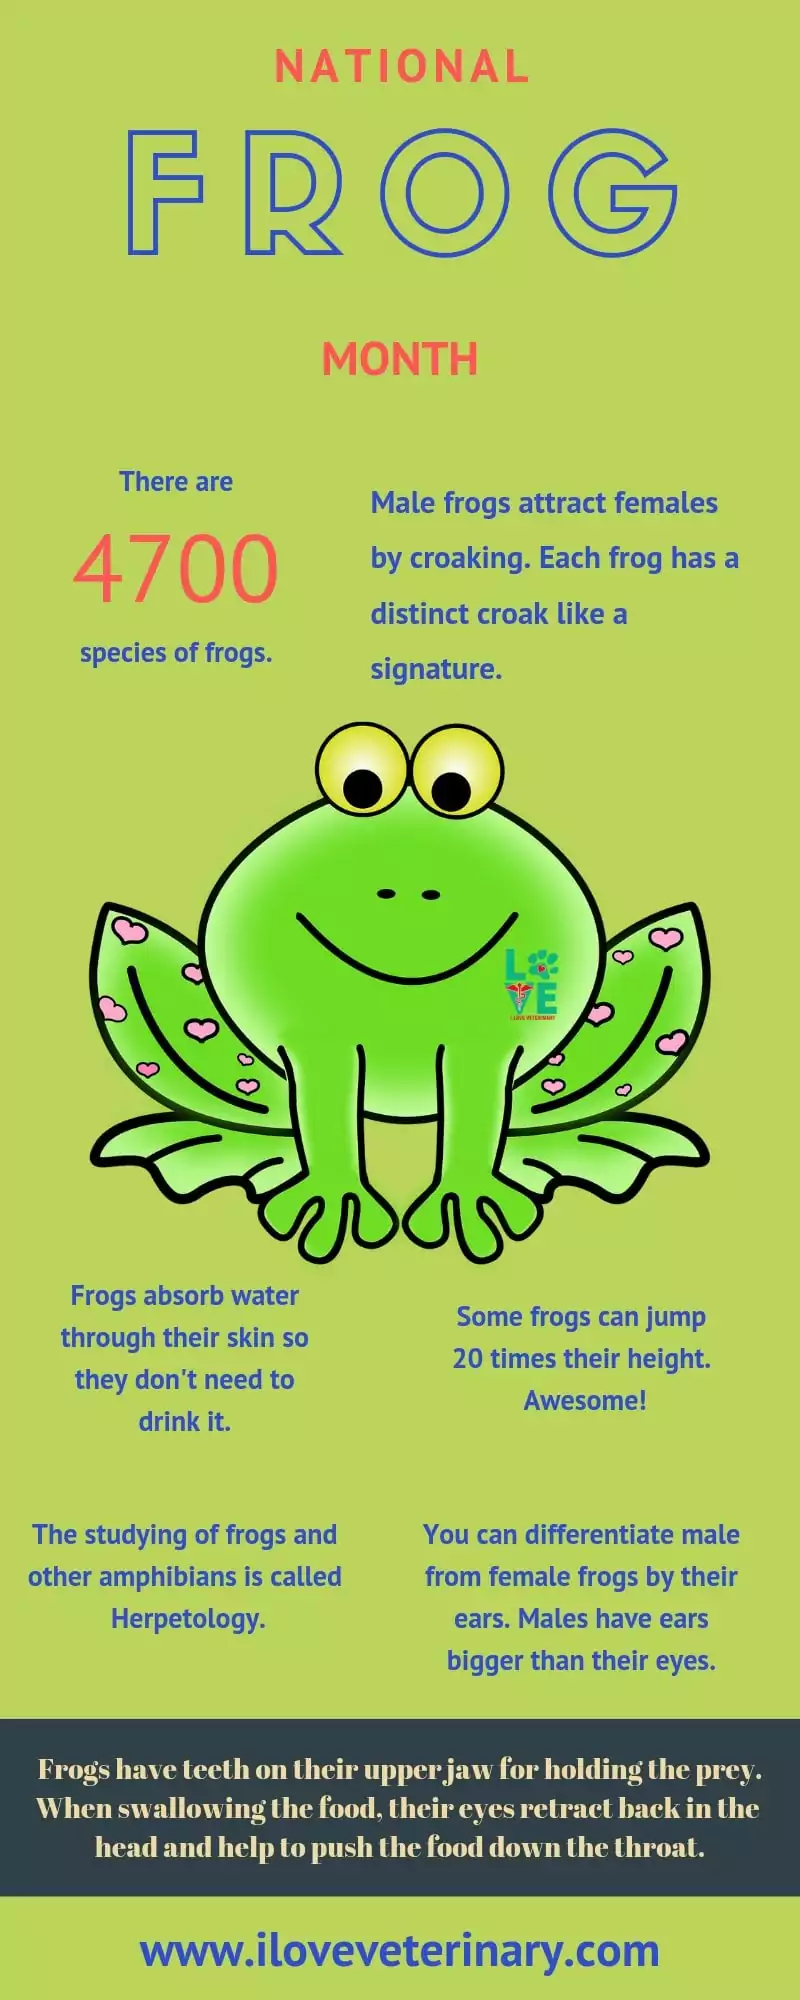 national frog month infographic